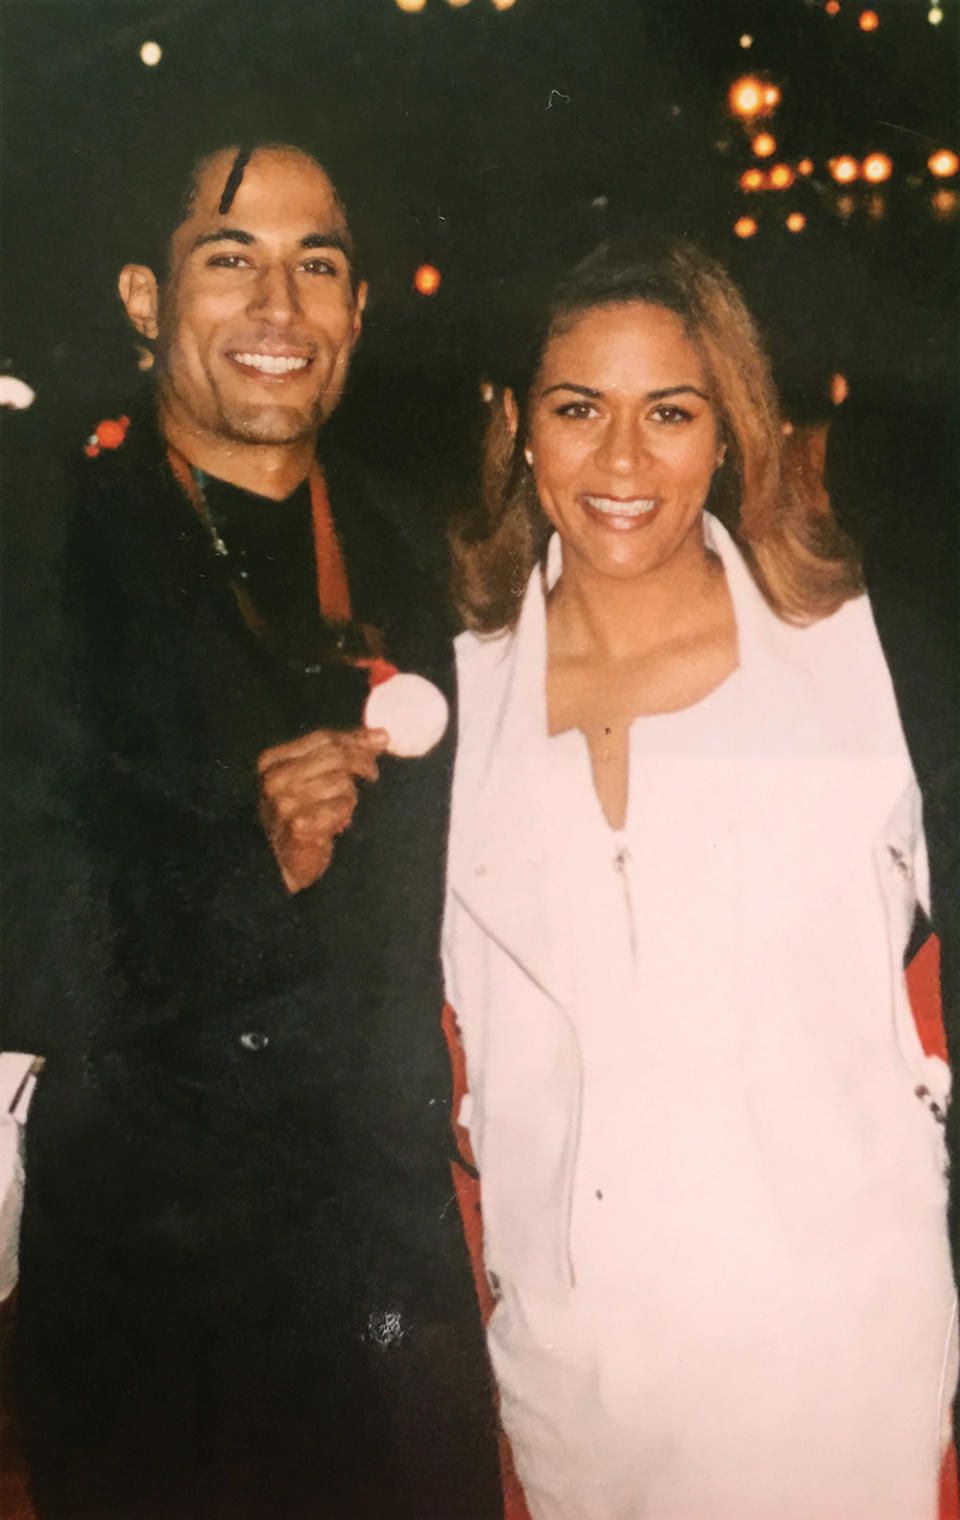 K.C. Amos and Shannon Amos at the 1997 Grammys, which they call a high point in their relationship.